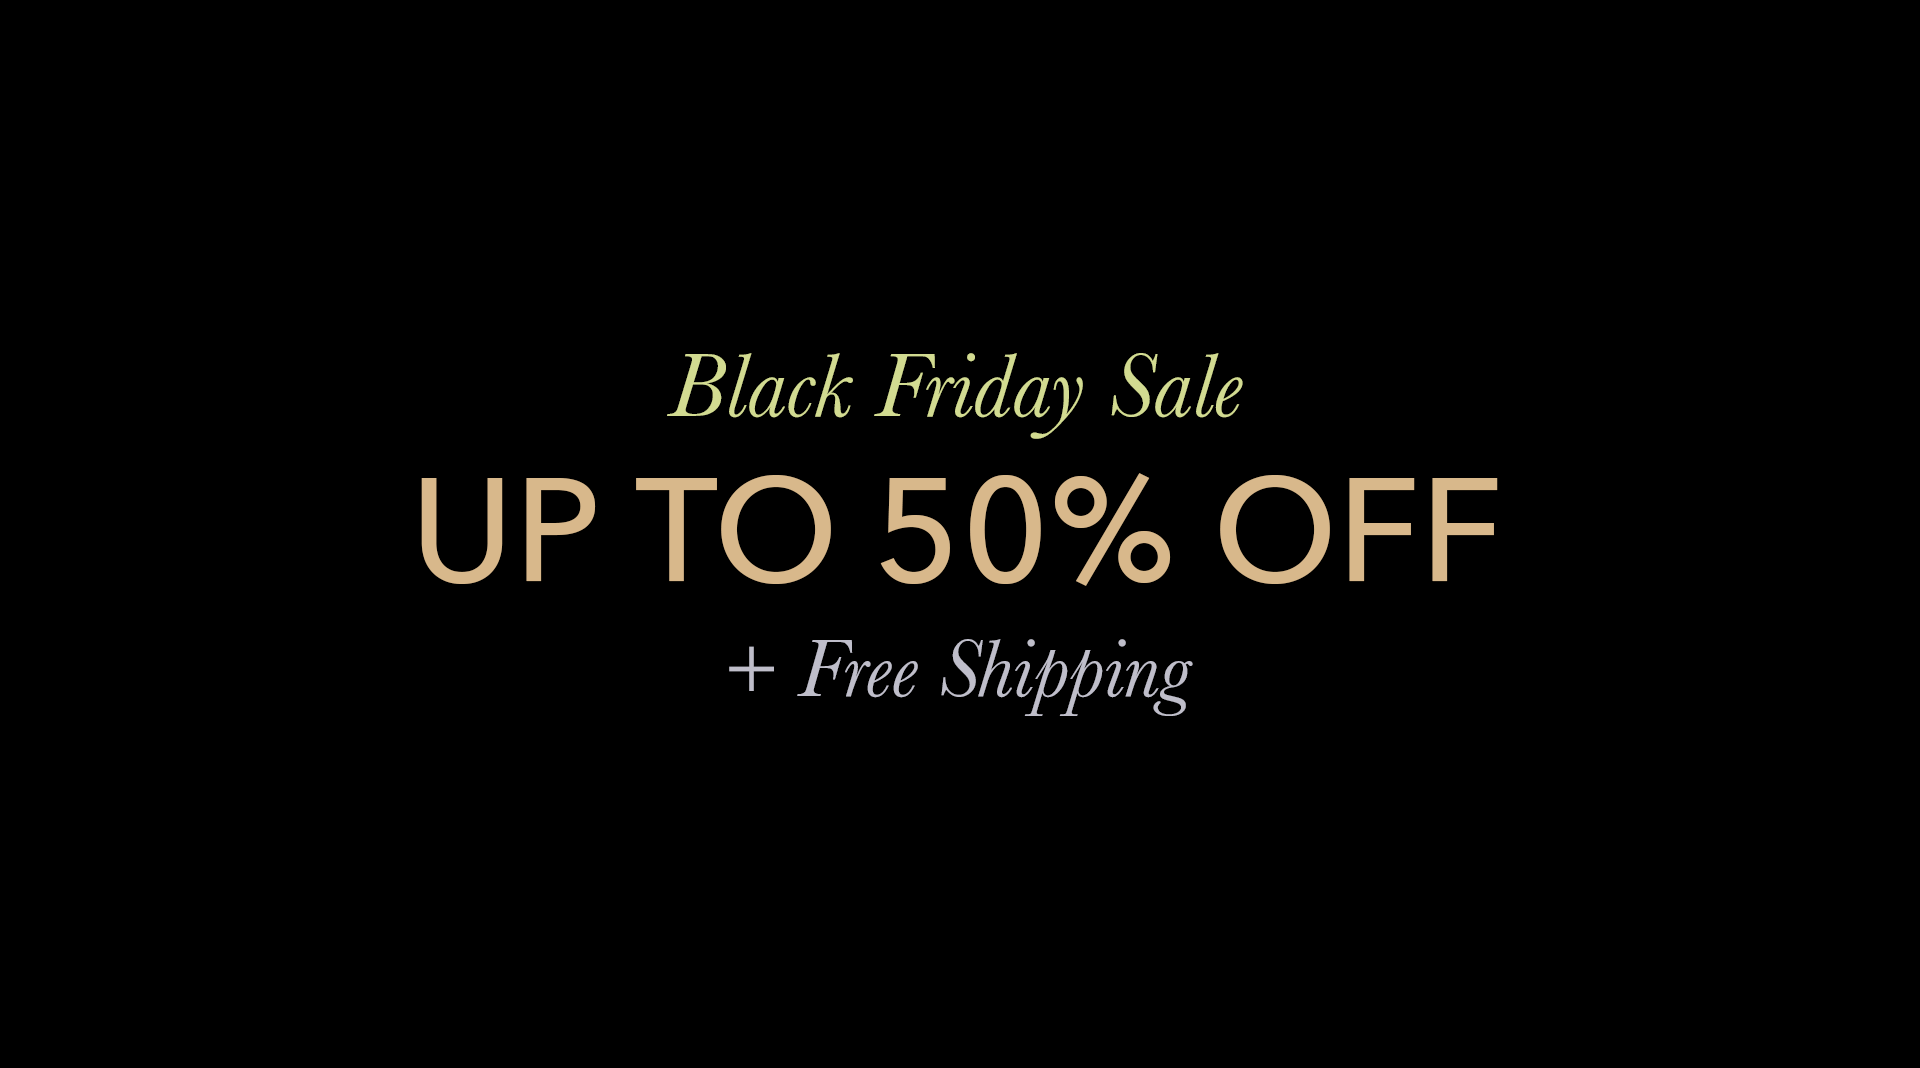 Text reads, Black Friday Sale, 25% - 50% Off Everything + Free Shipping. Shop Now